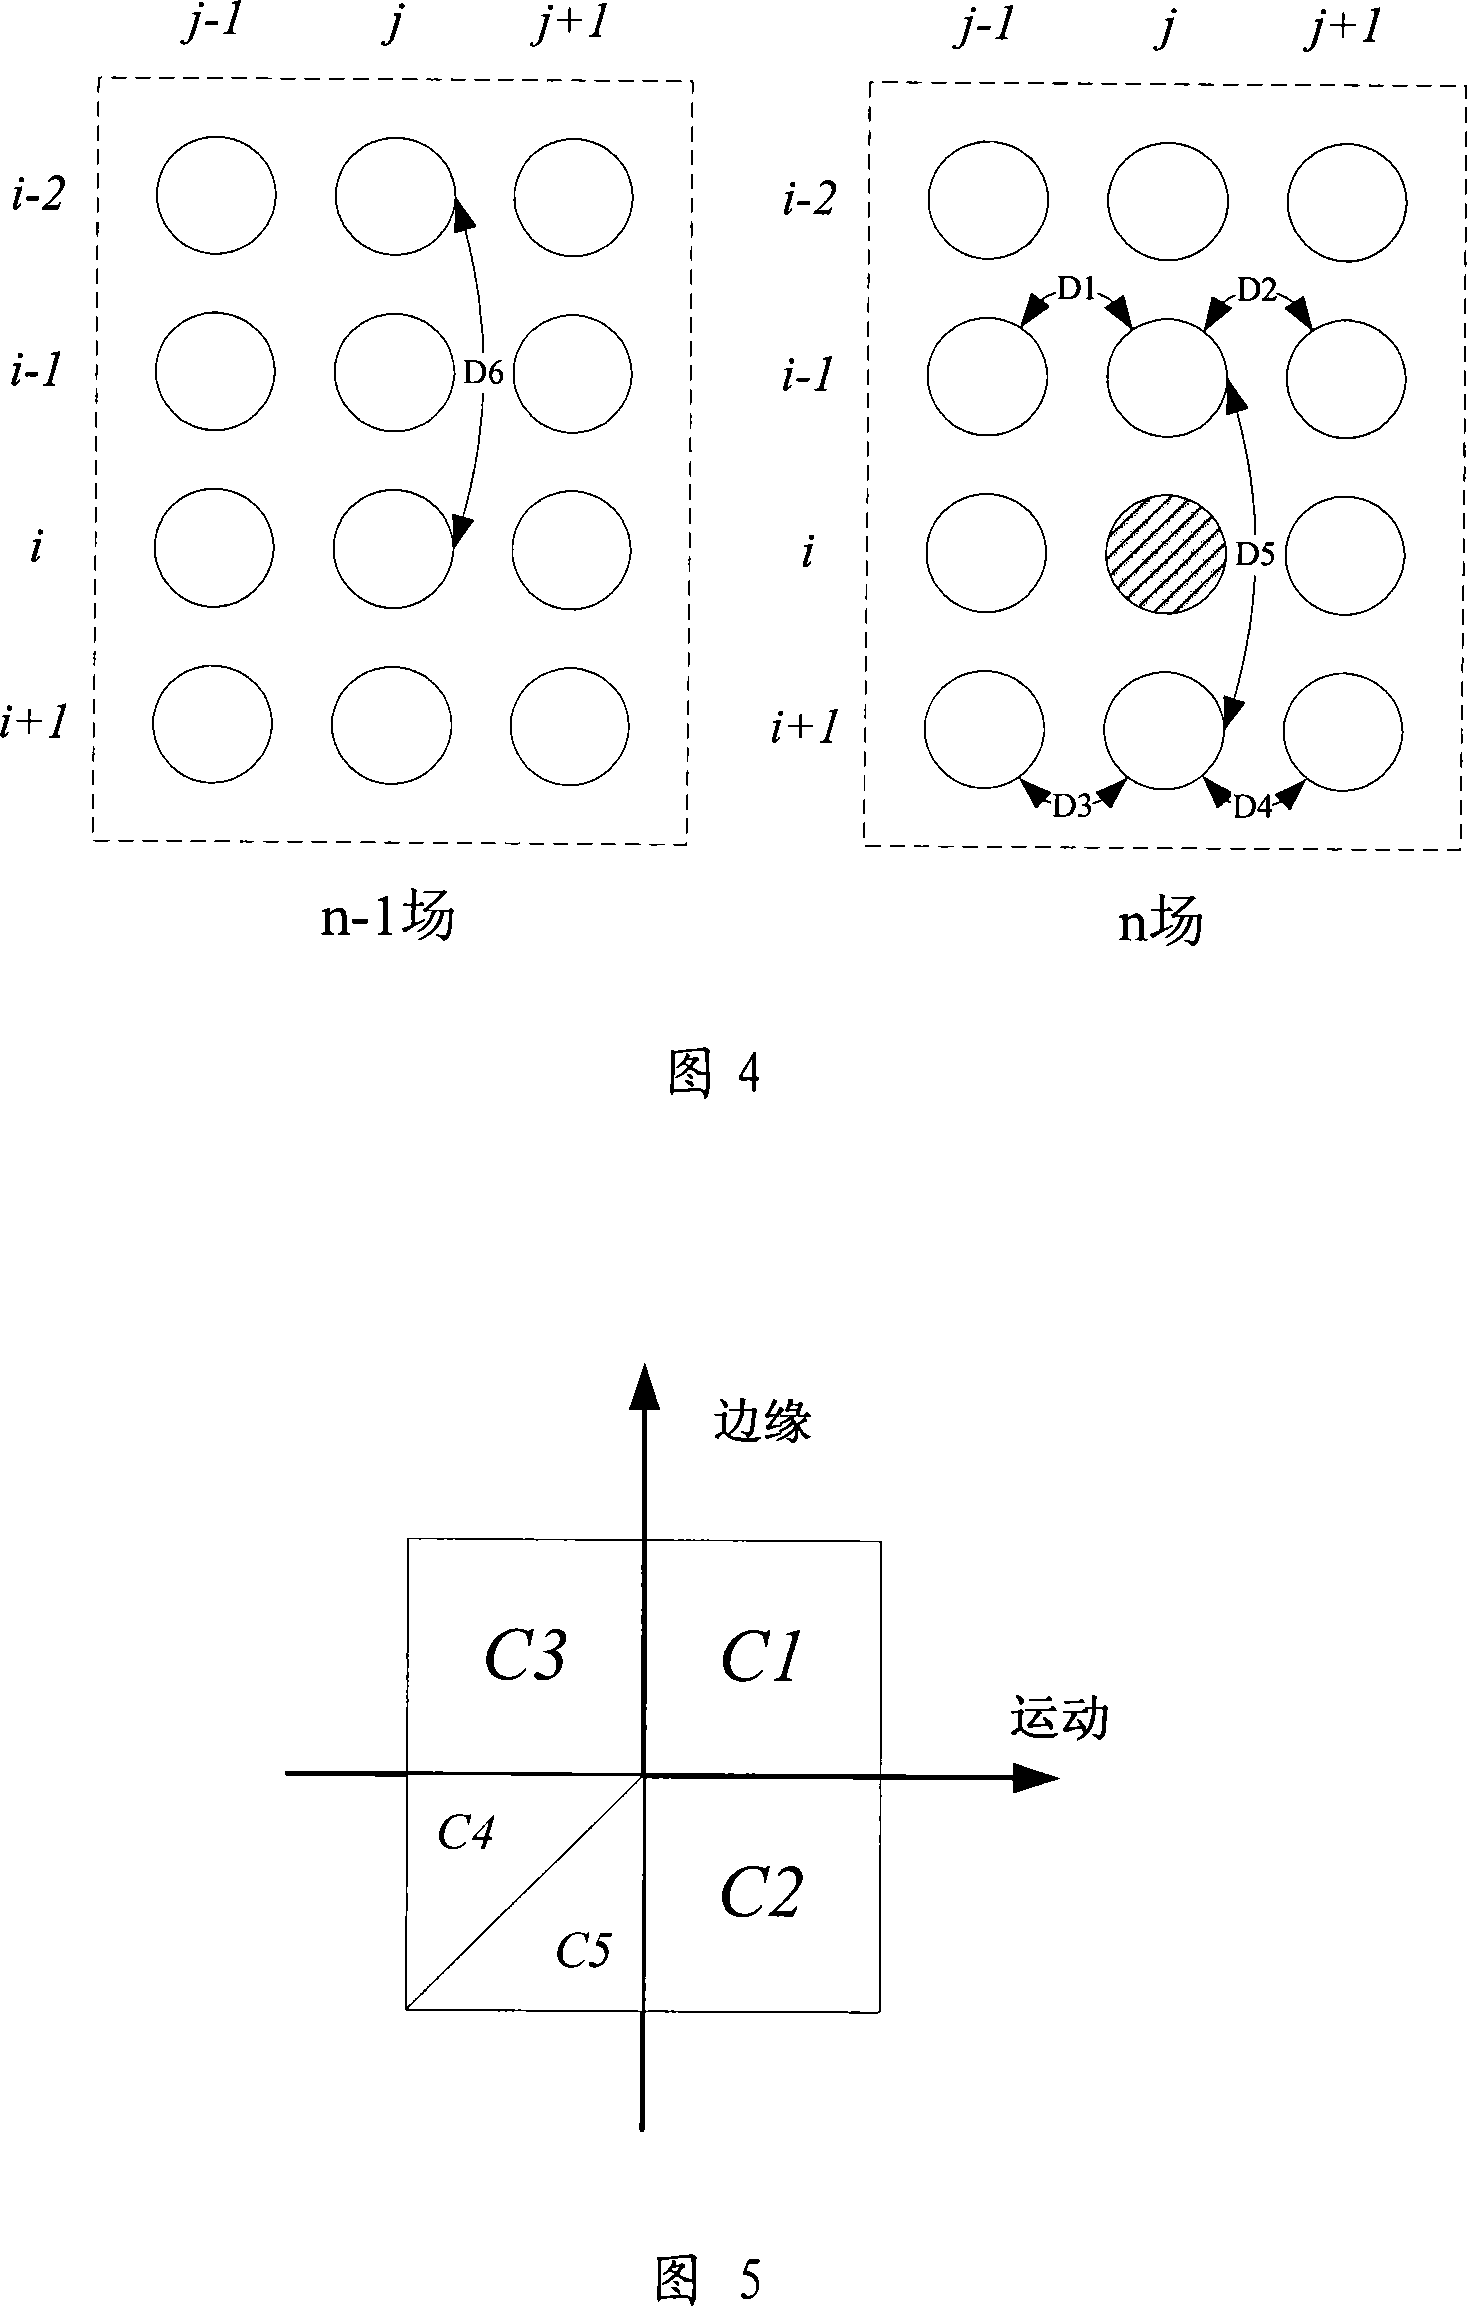 Video image motion processing method and implementation device with global feature classification